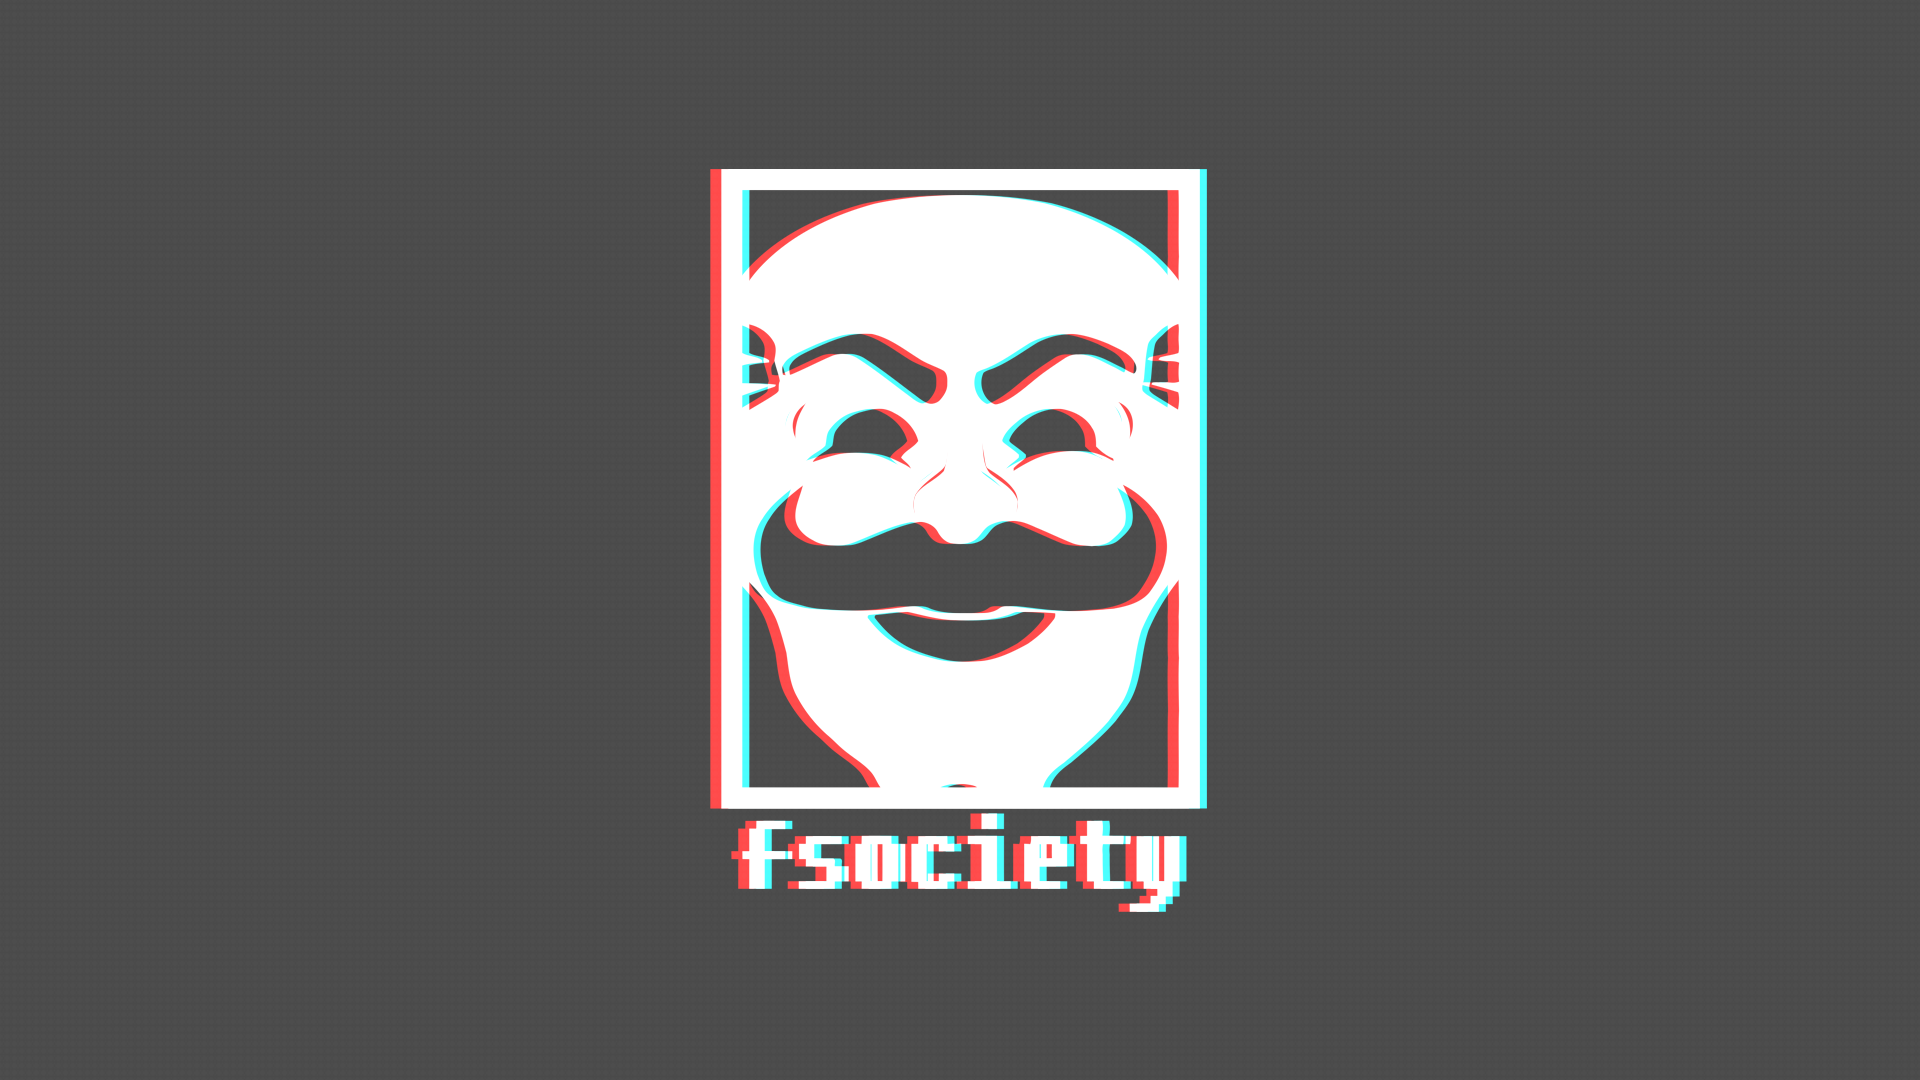 Fsociety Mr Robot Simple 1920x1080